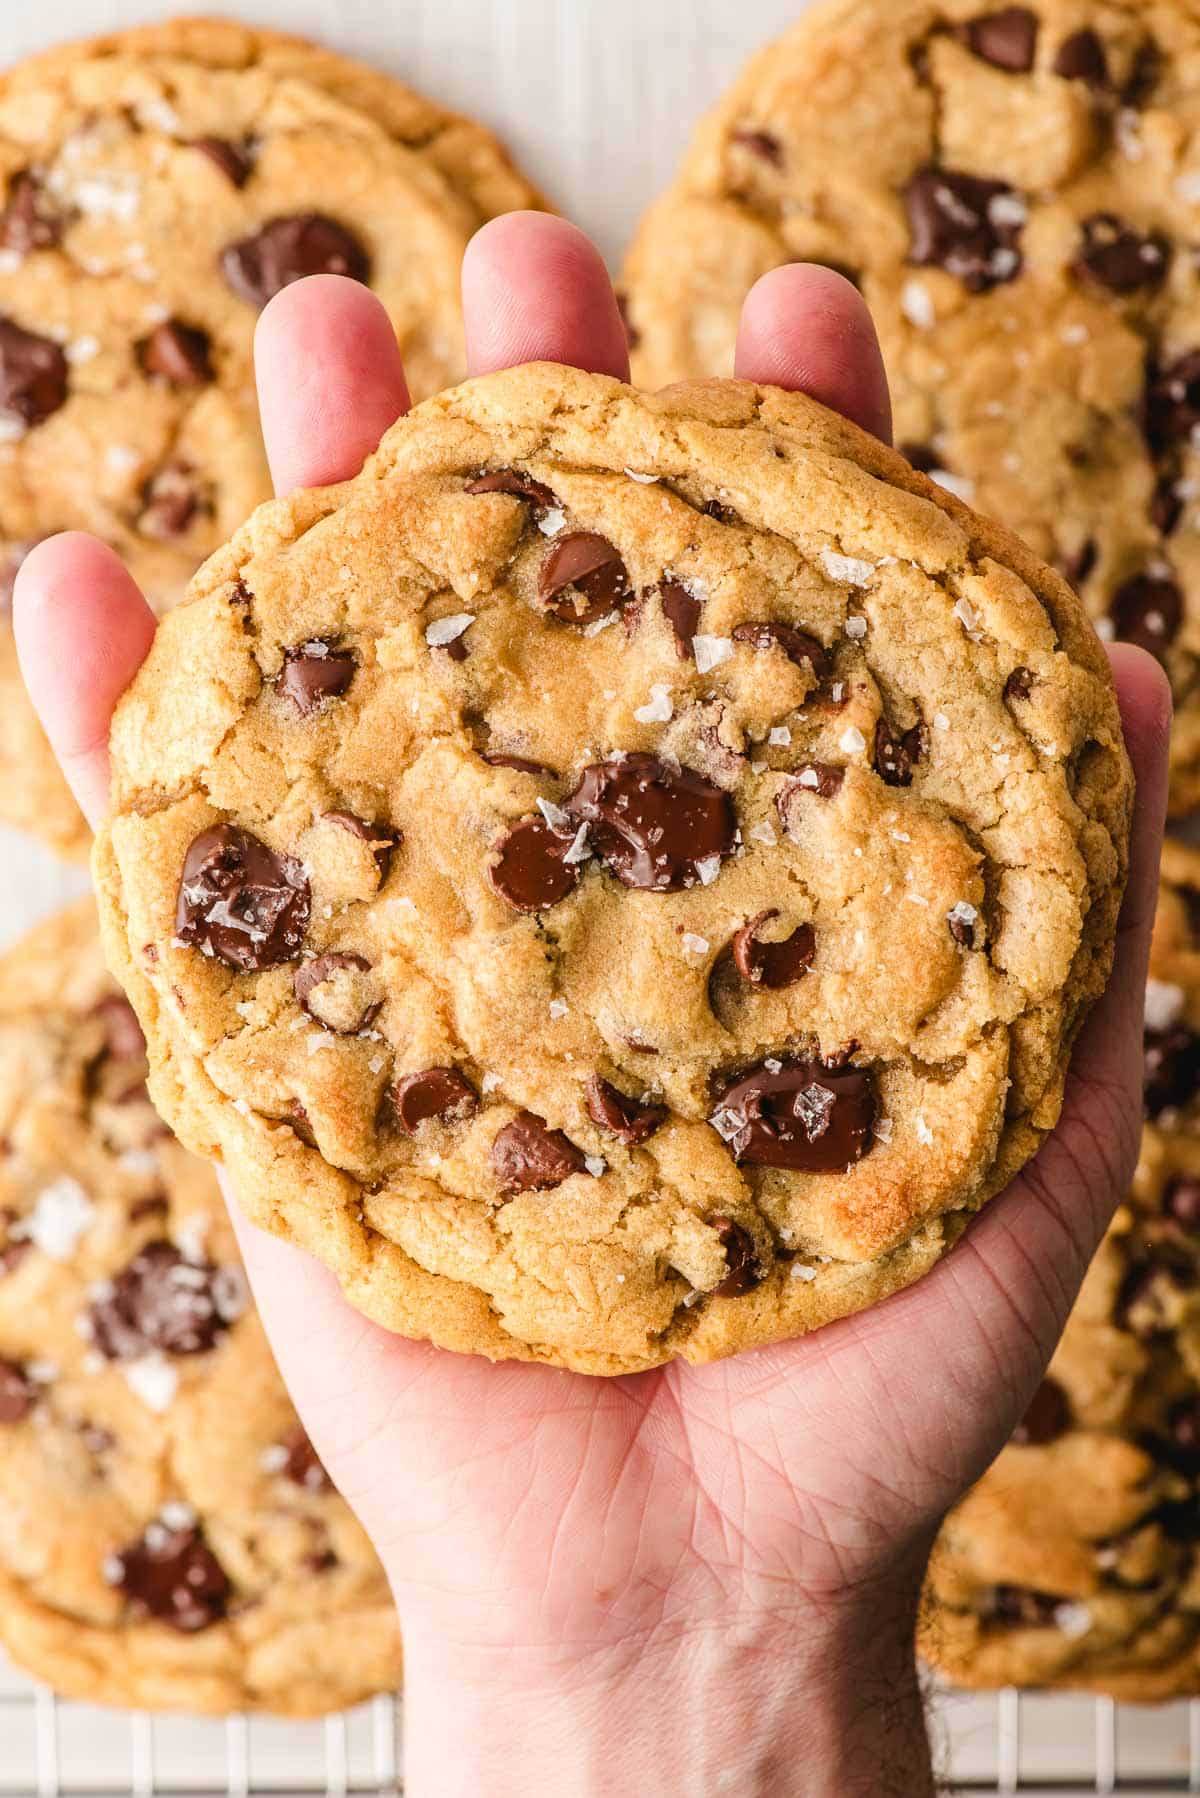 Palm holding a big chocolate chip cookie.